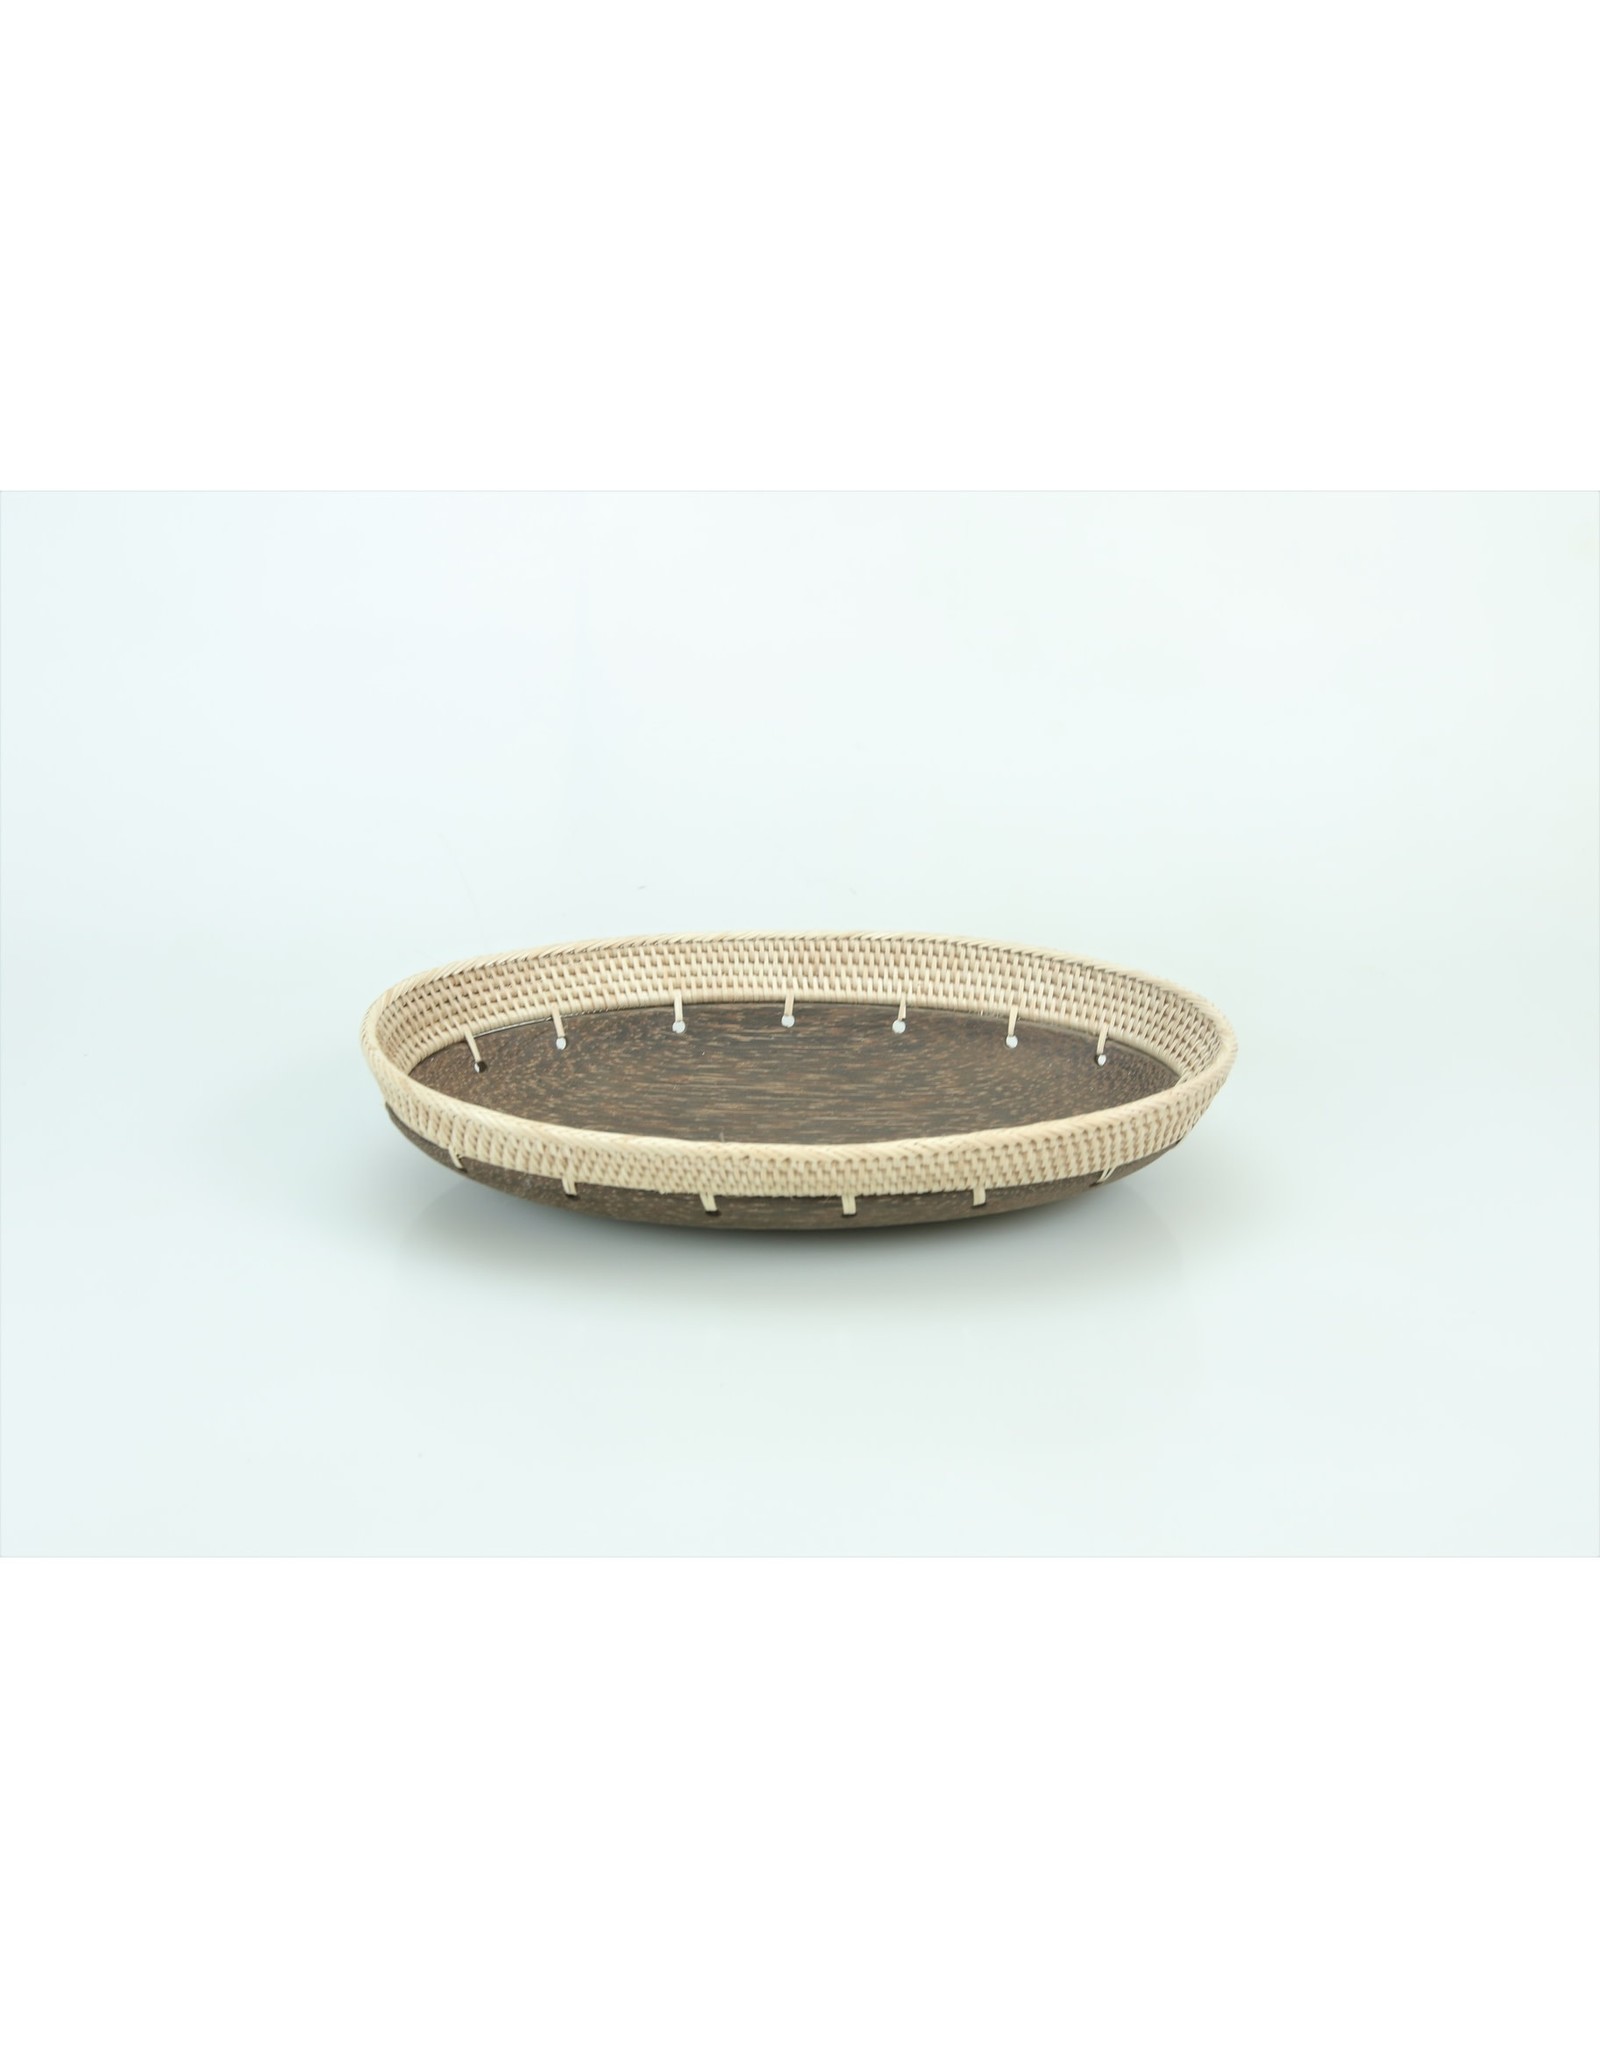 Trade roots Hand Carved Oval Palm Wood Tray with Rattan Accent Trim 10.5"